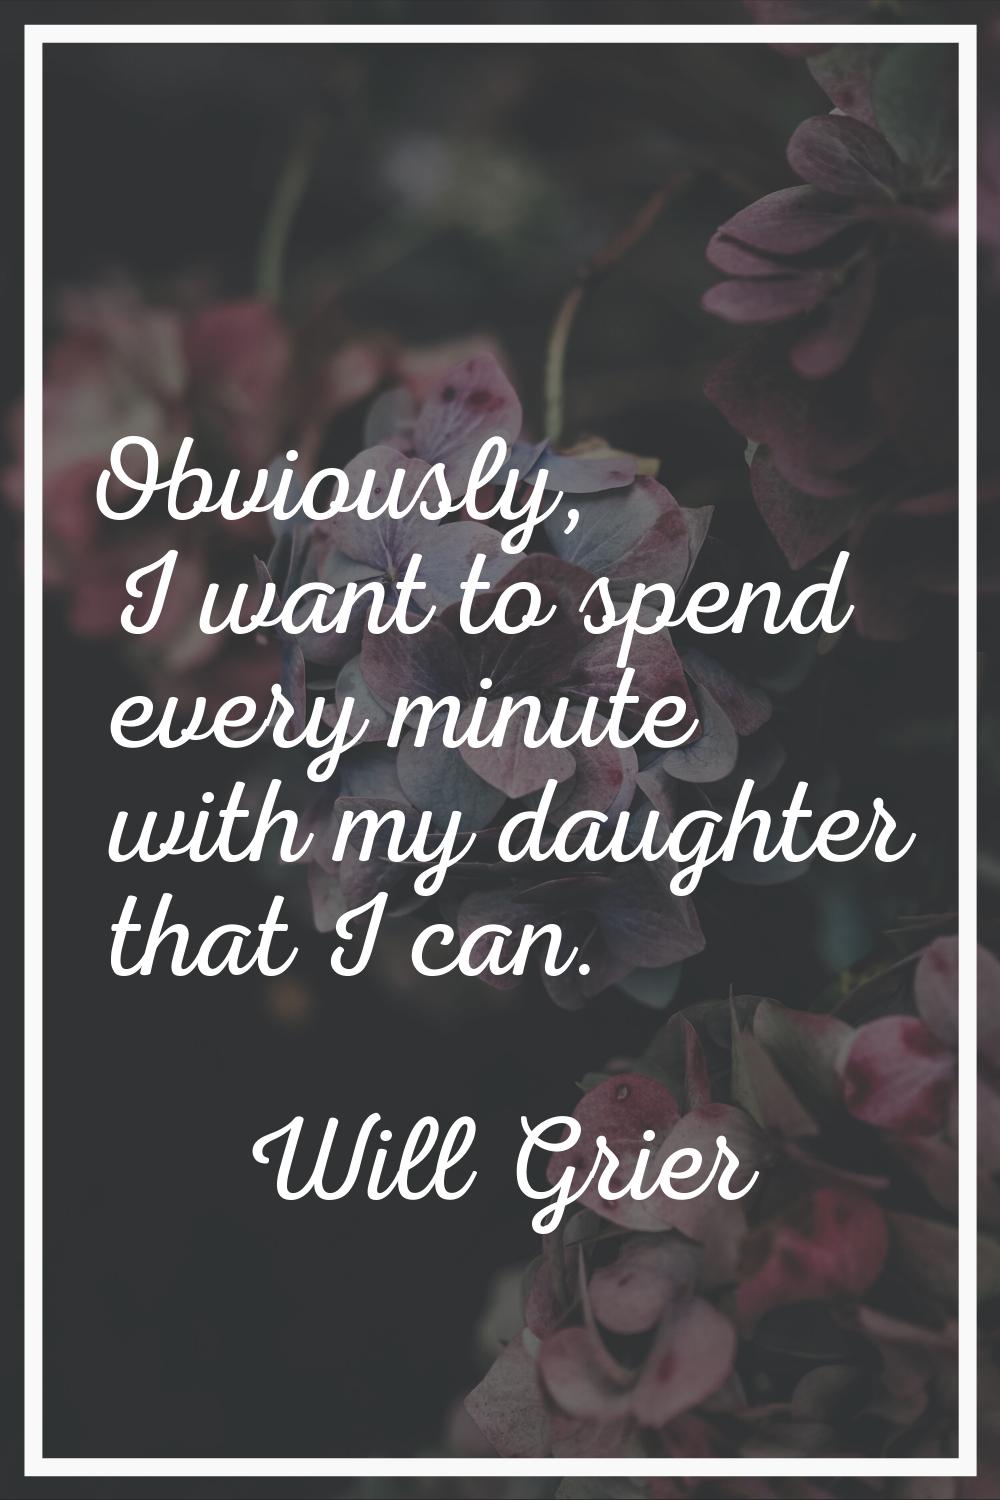 Obviously, I want to spend every minute with my daughter that I can.